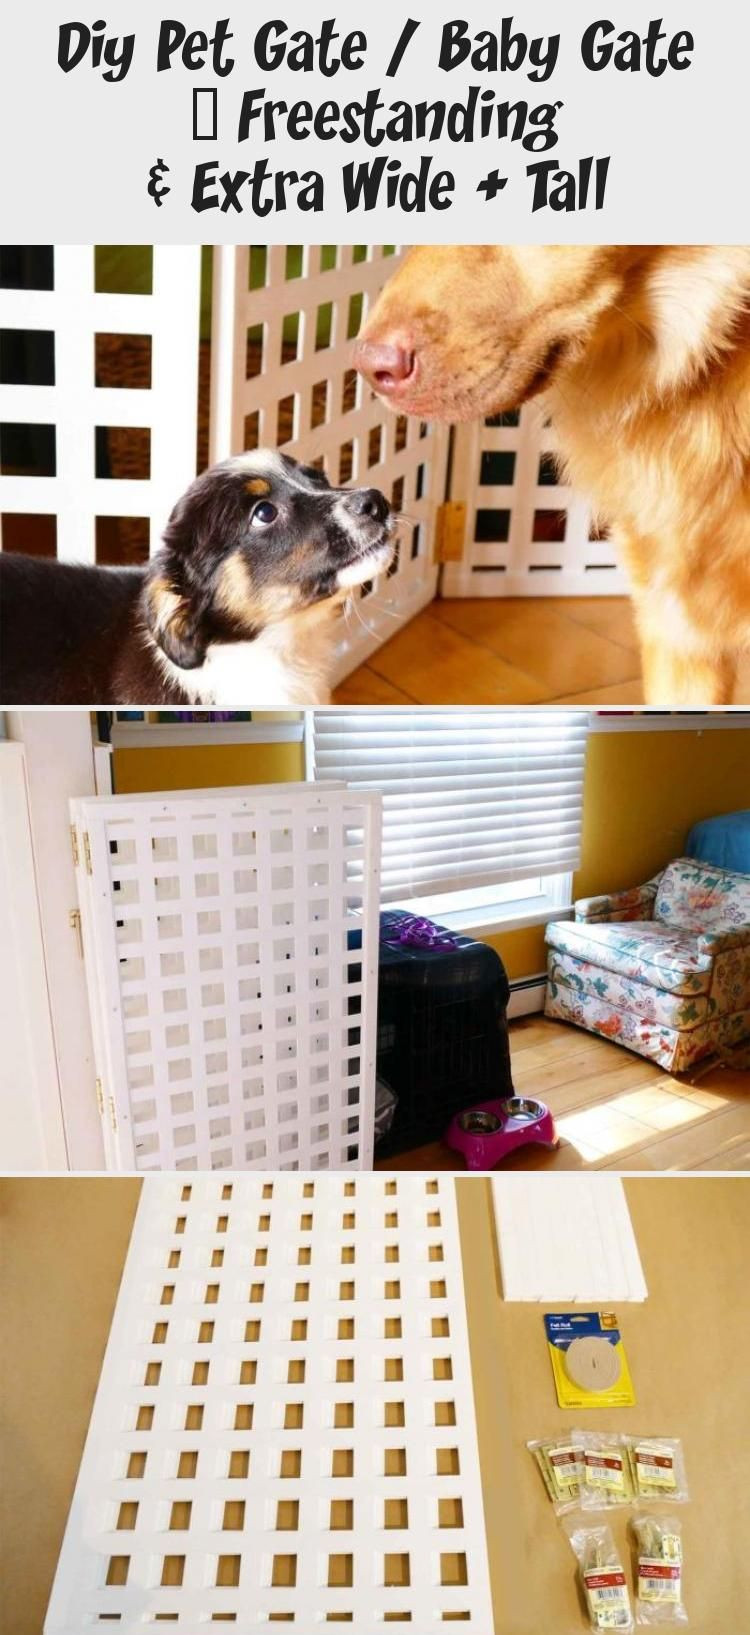 DIY Extra Wide Baby Gate
 Diy Pet Gate Baby Gate – Freestanding & Extra Wide